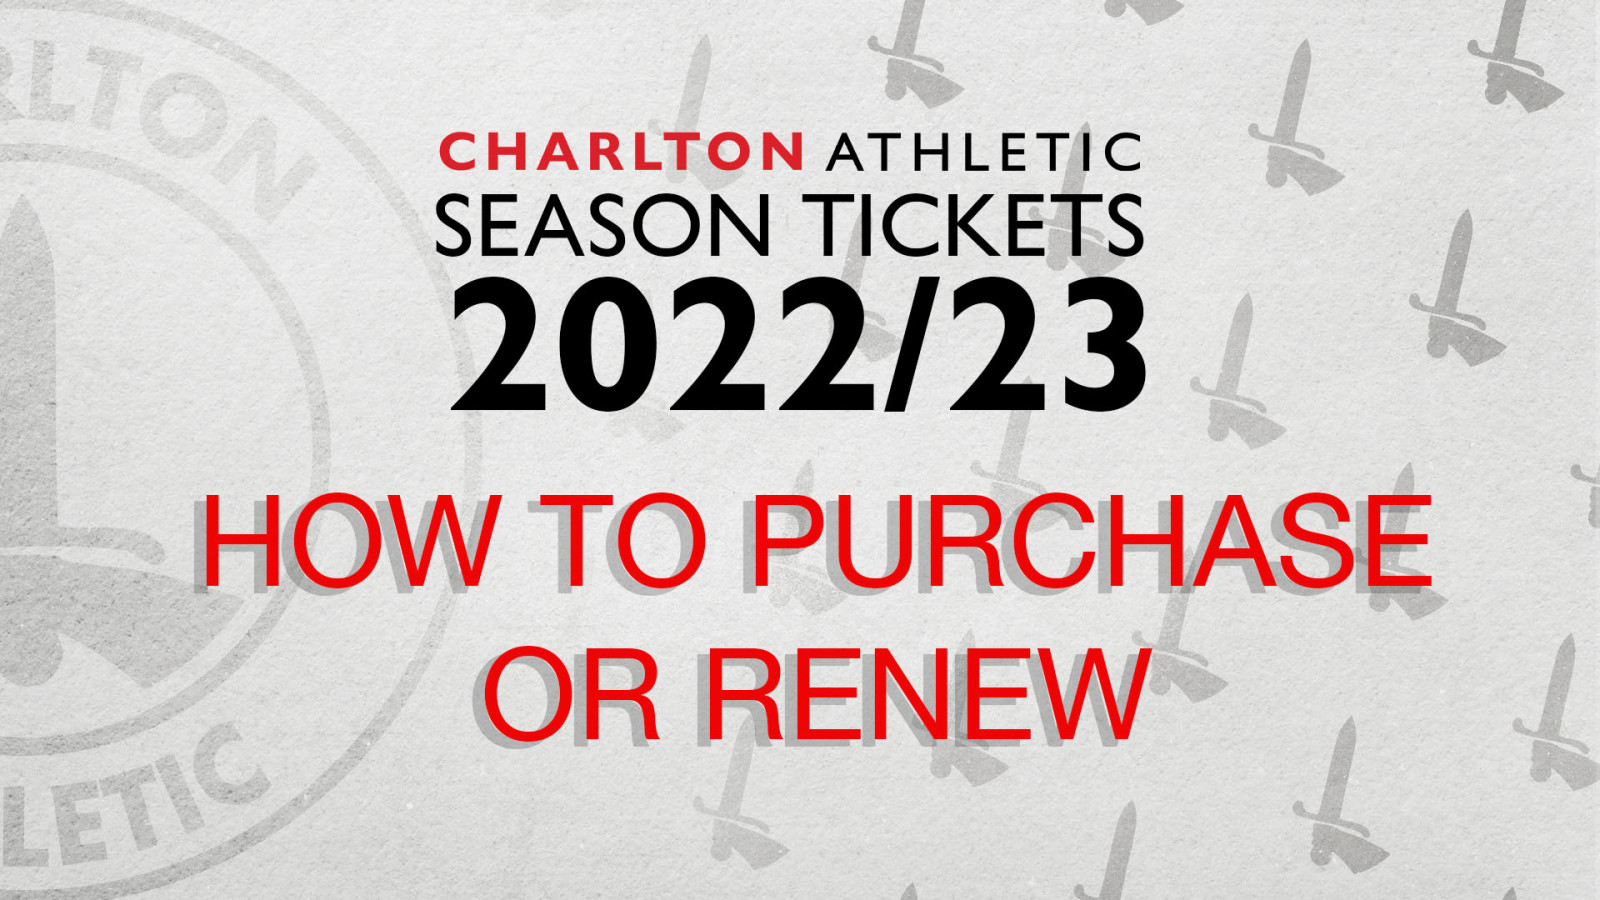 How to purchase your 2022/23 season ticket